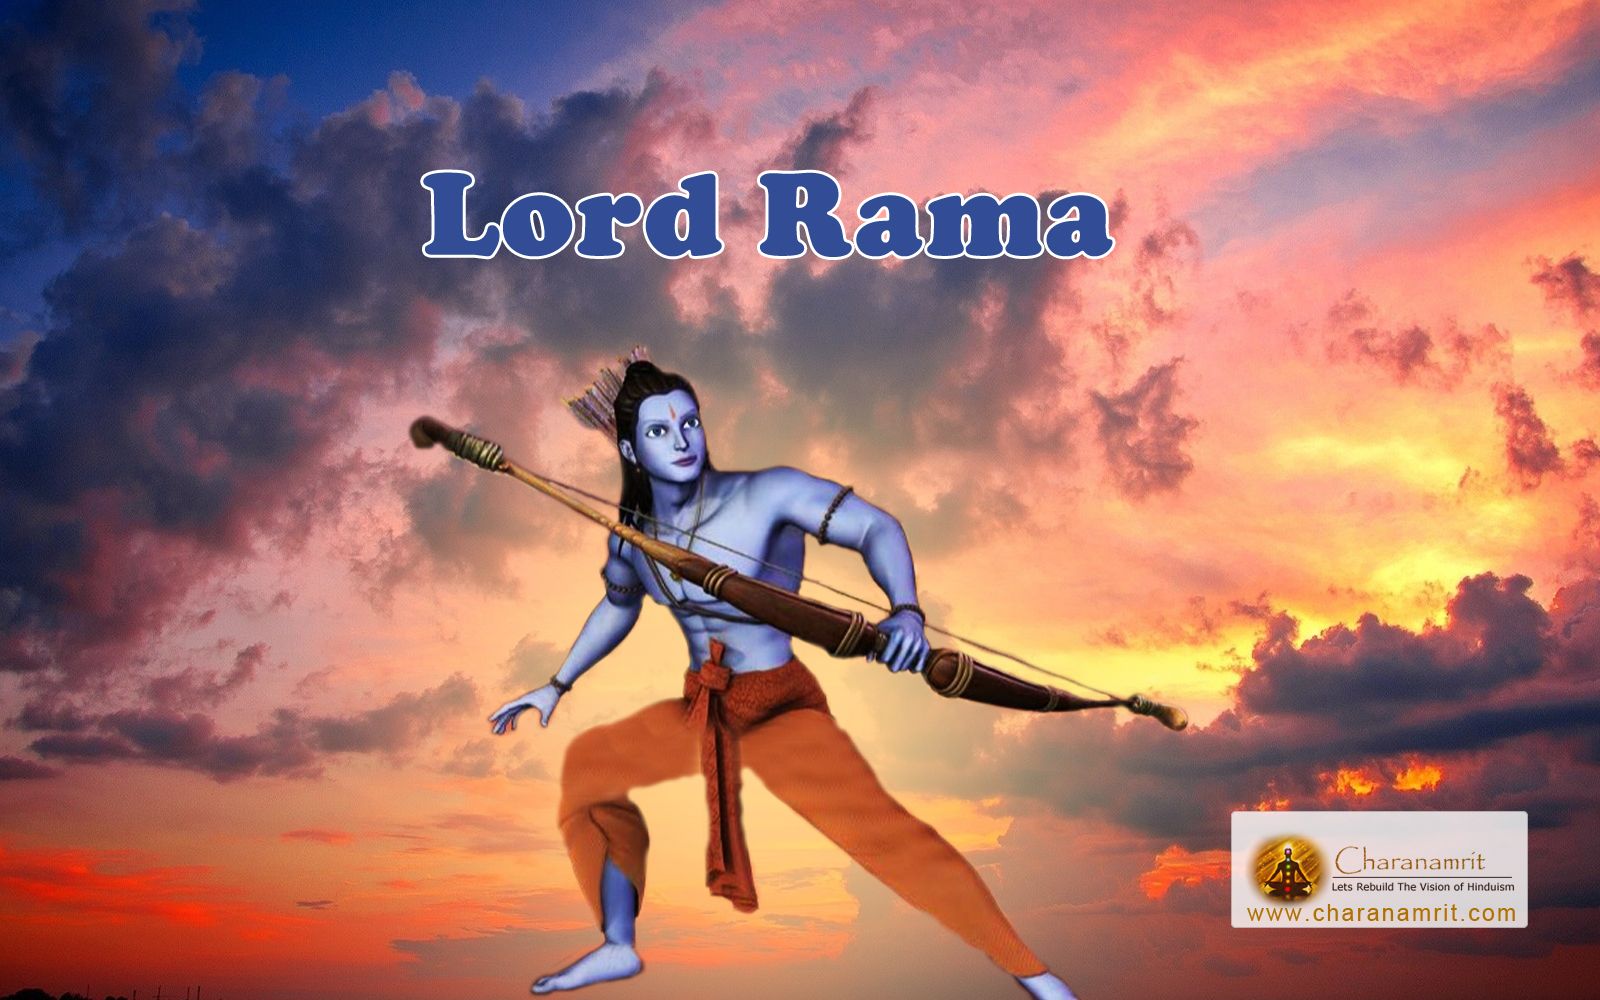 Free download 3D HD Wallpaper for download Lord Rama 3D HD